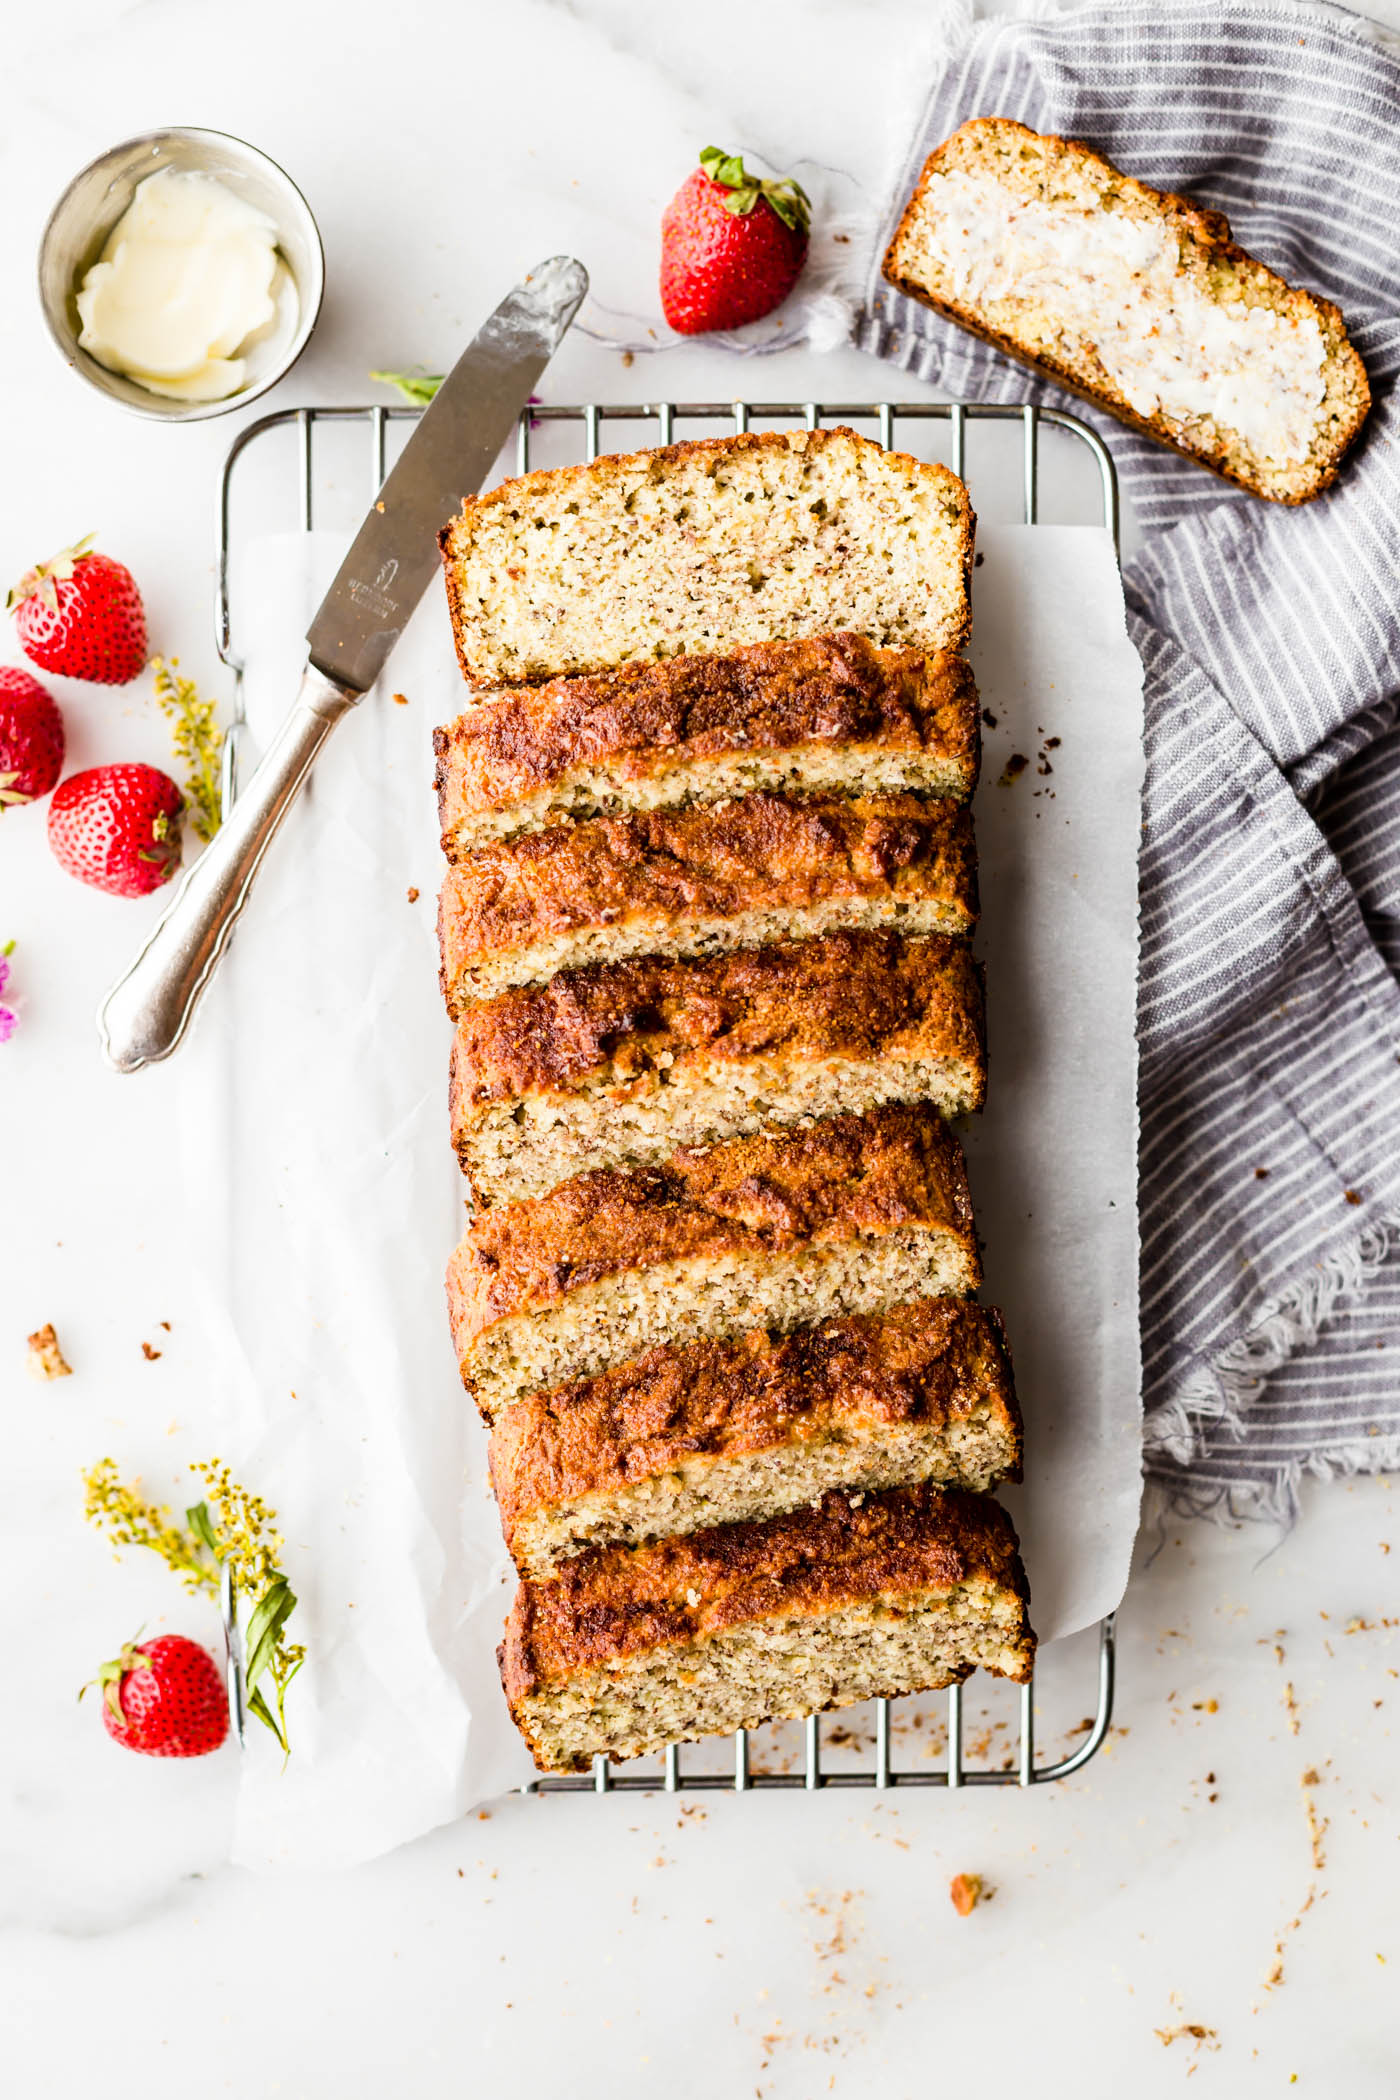 Paleo CINNAMON ALMOND FLOUR BREAD! Our go-to every day bread! Simple healthy ingredients, naturally low in sugar, soft and delicious.